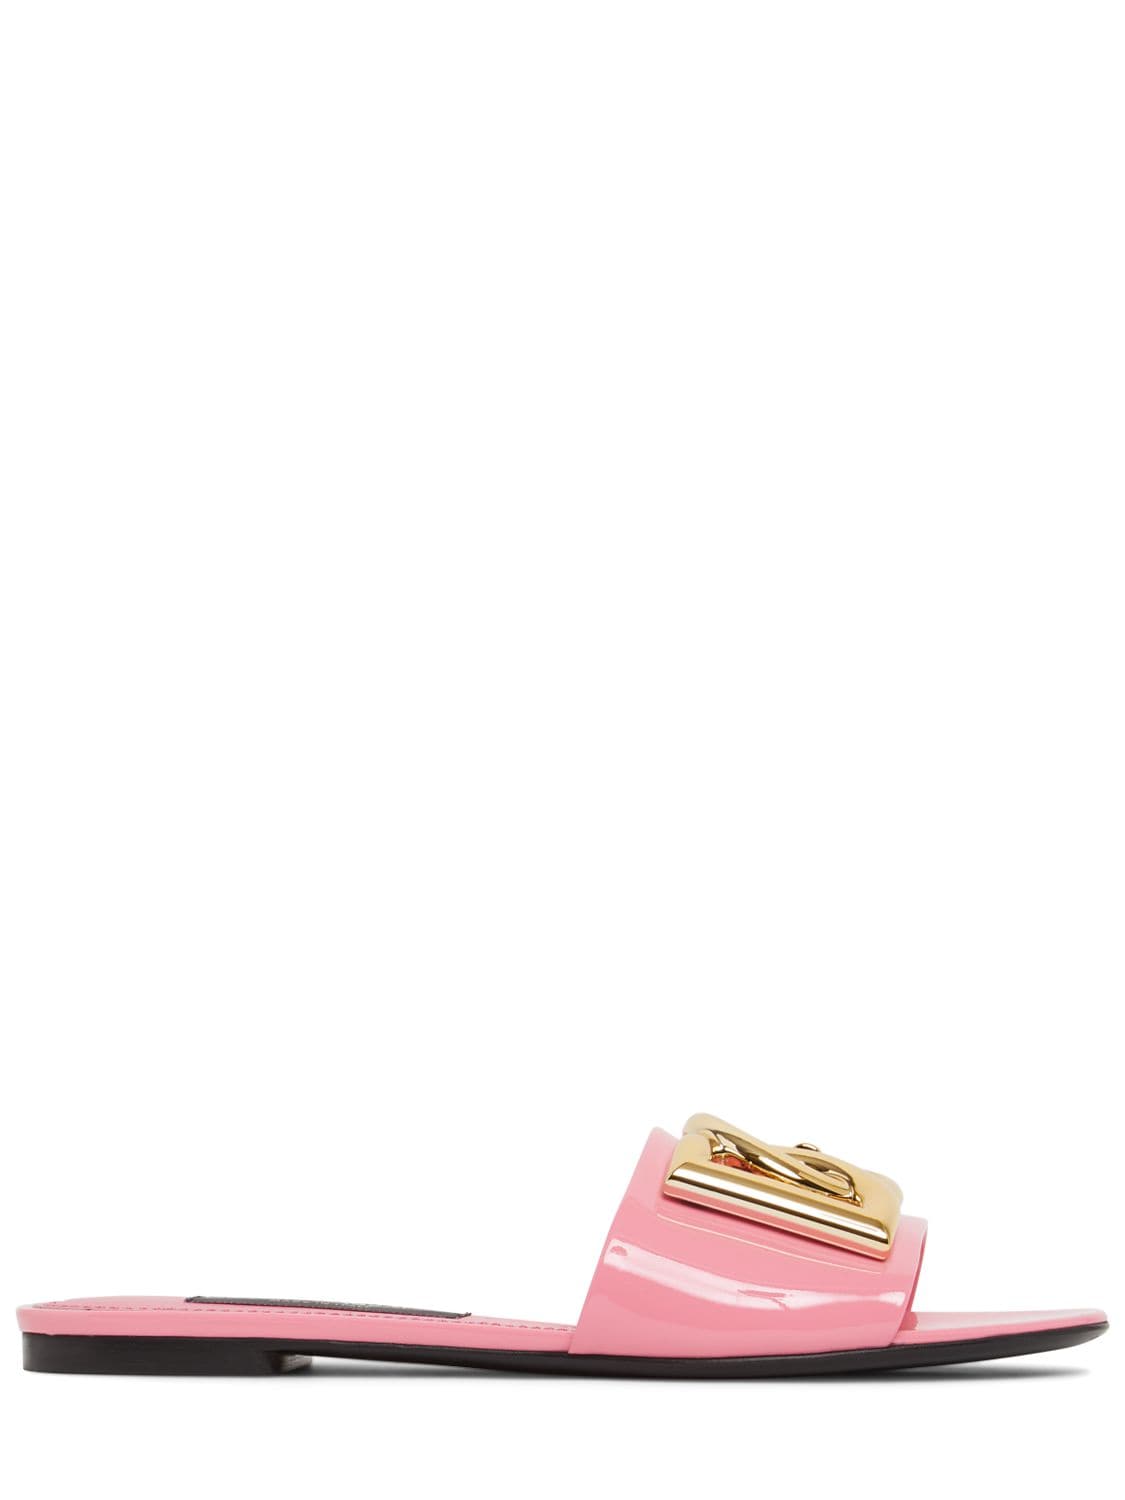 Image of 10mm Patent Leather Slide Sandals